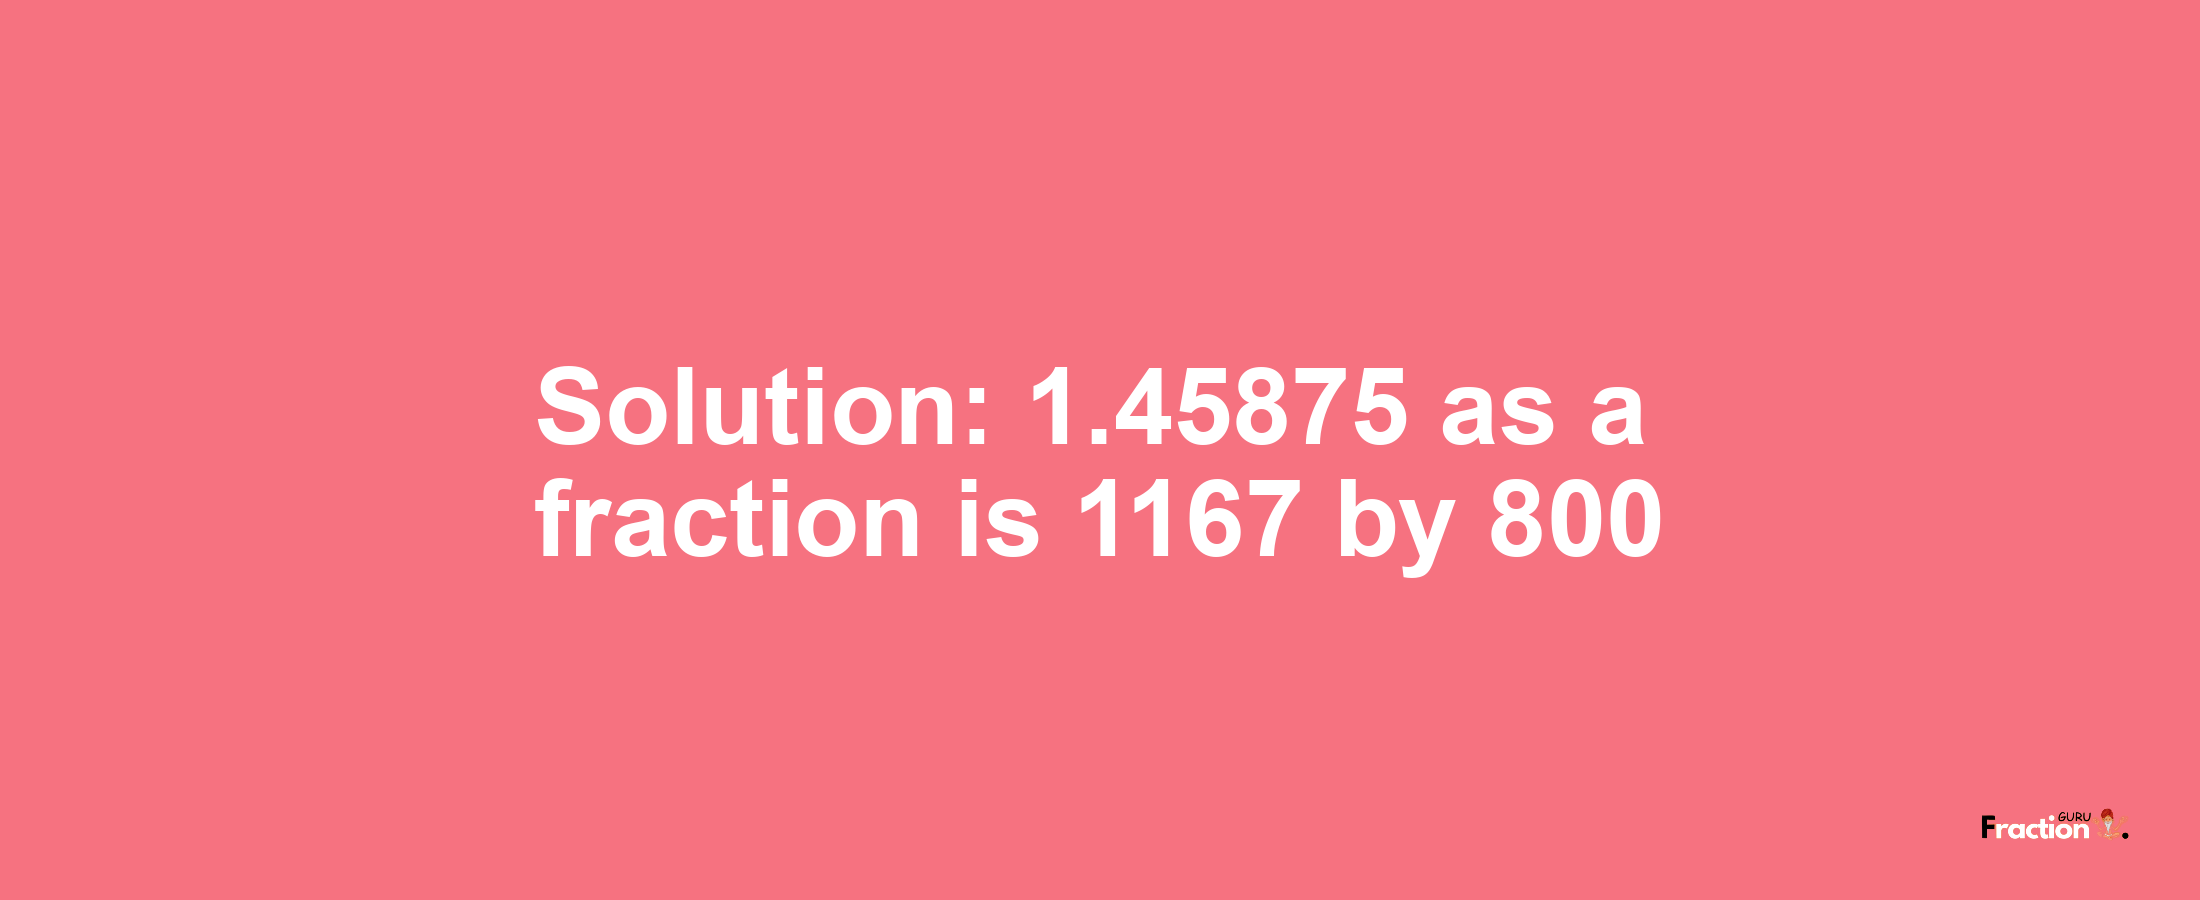 Solution:1.45875 as a fraction is 1167/800